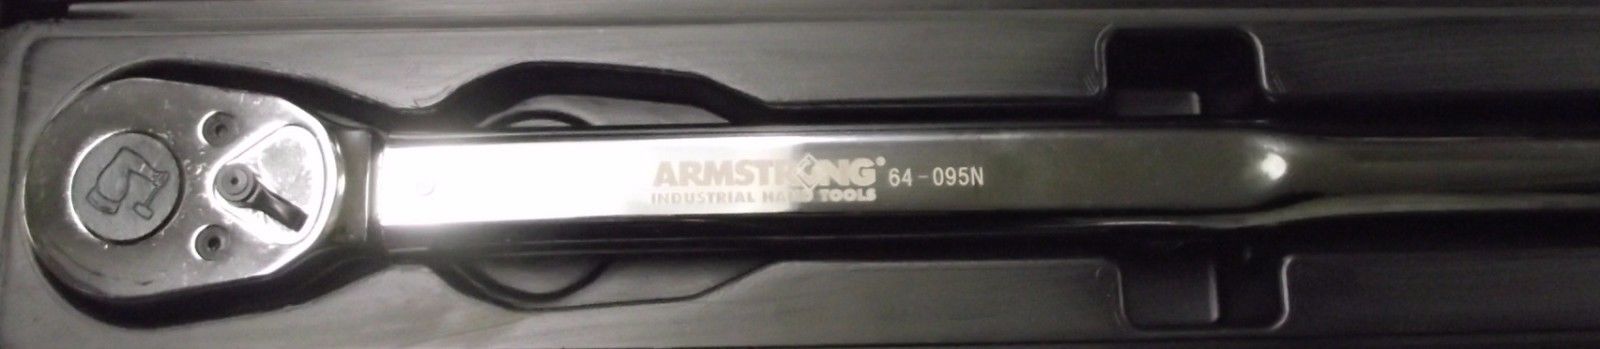 Armstrong 64-095N 3/4" Drive Micrometer Torque Wrench Ratchet Head 100-600ft/lb